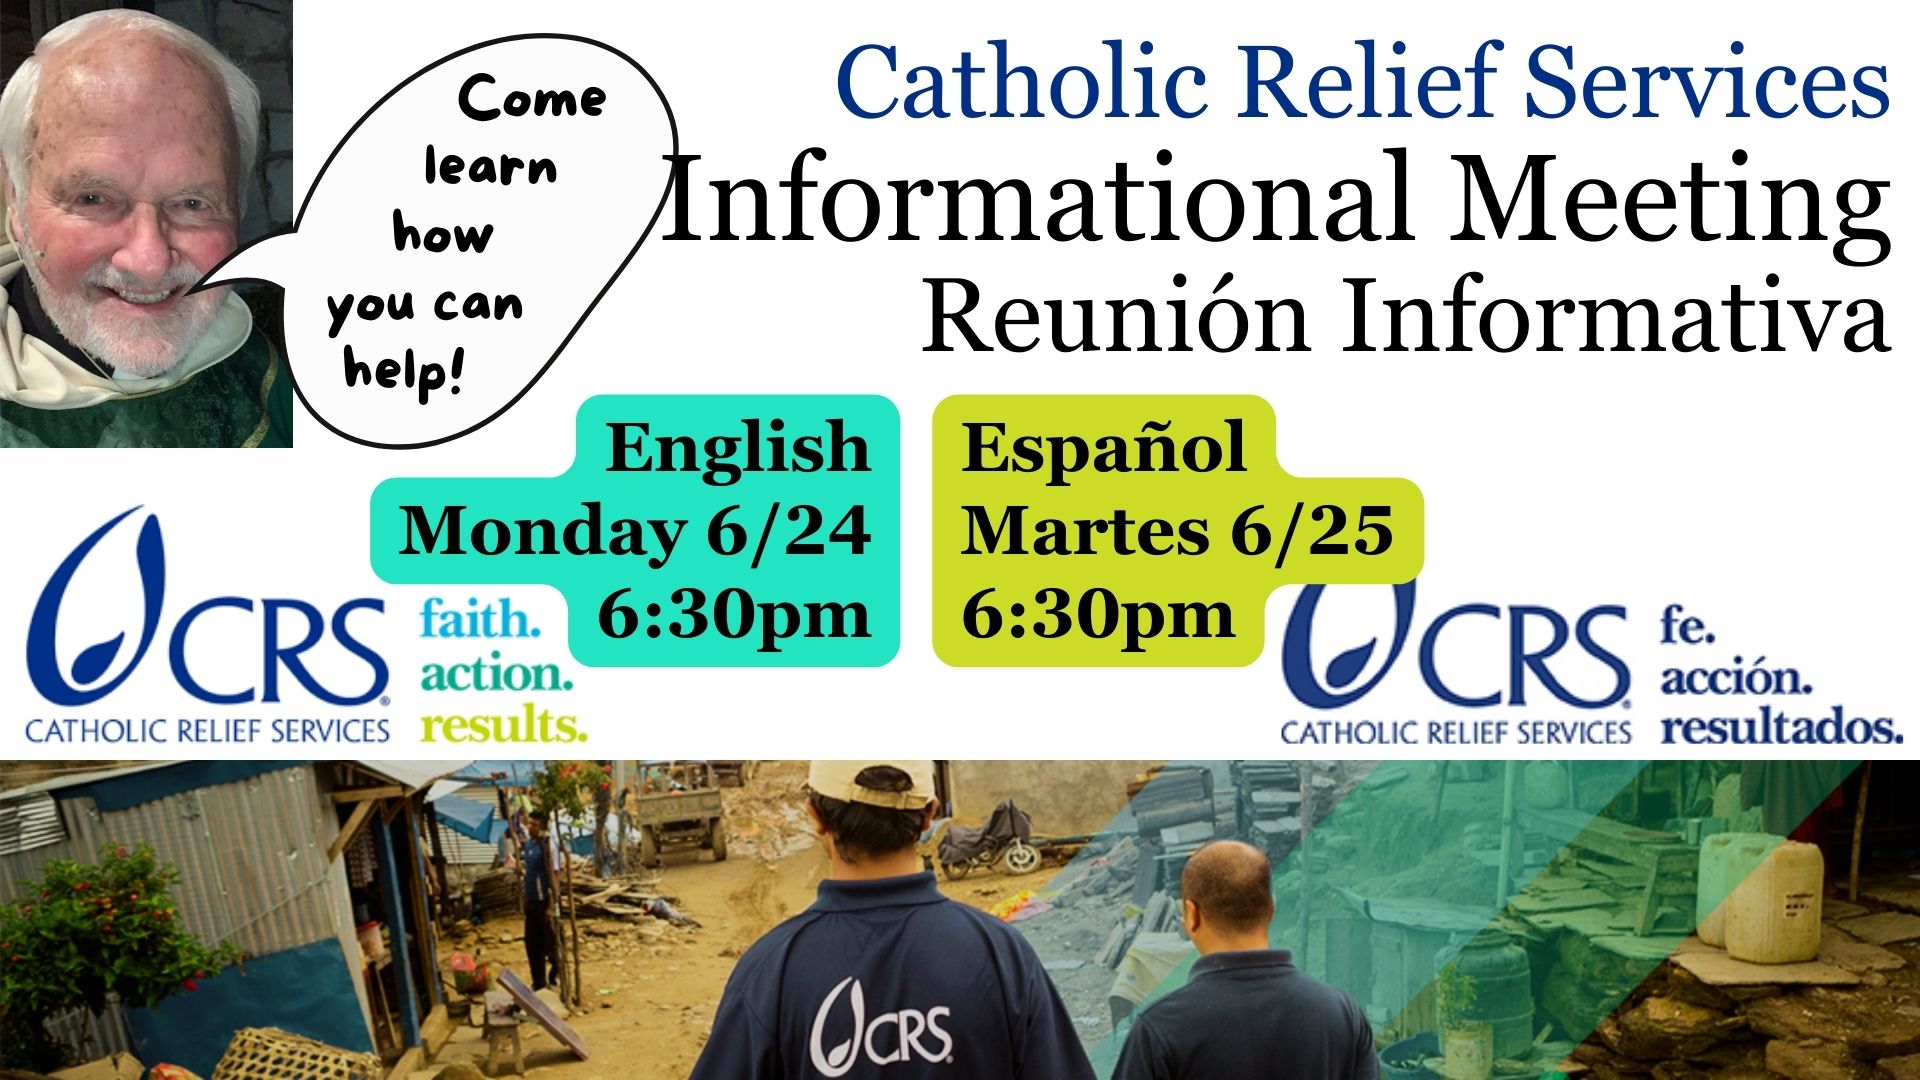 Catholic Relief Services Informational Meeting